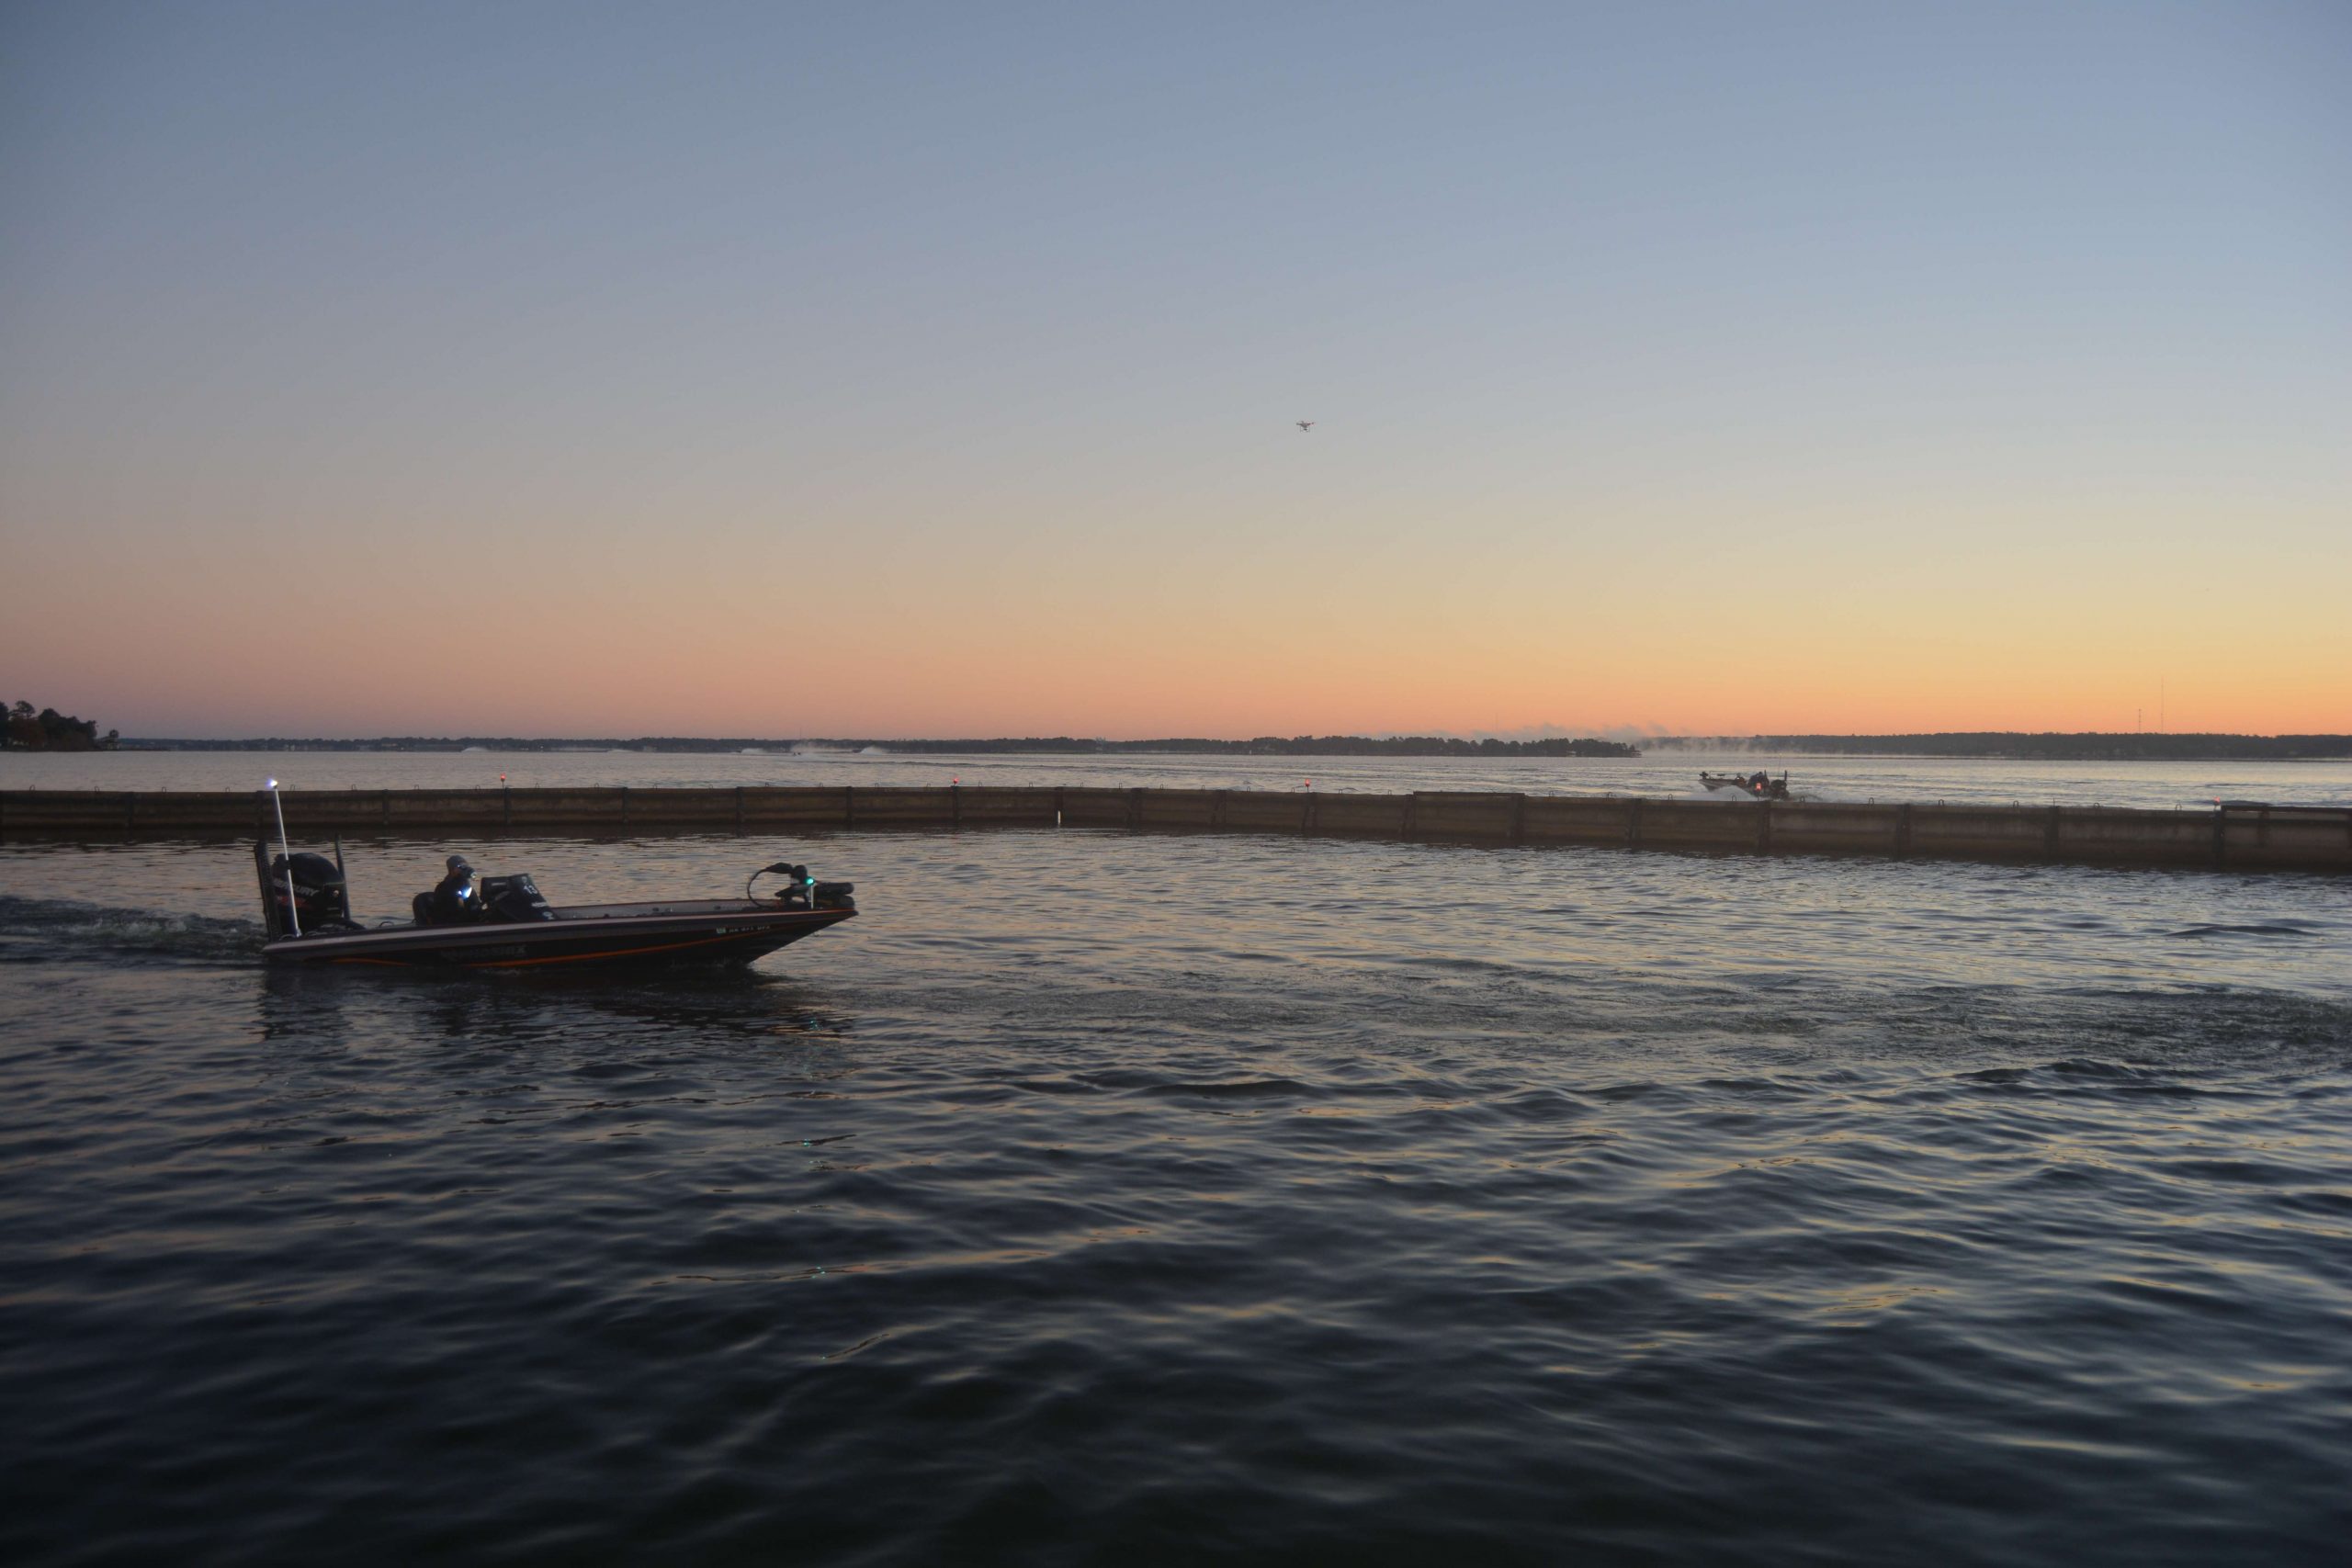 Day 3 is officially underway! Tune into Bassmaster.com at 3 p.m. CT for the live weigh-in.